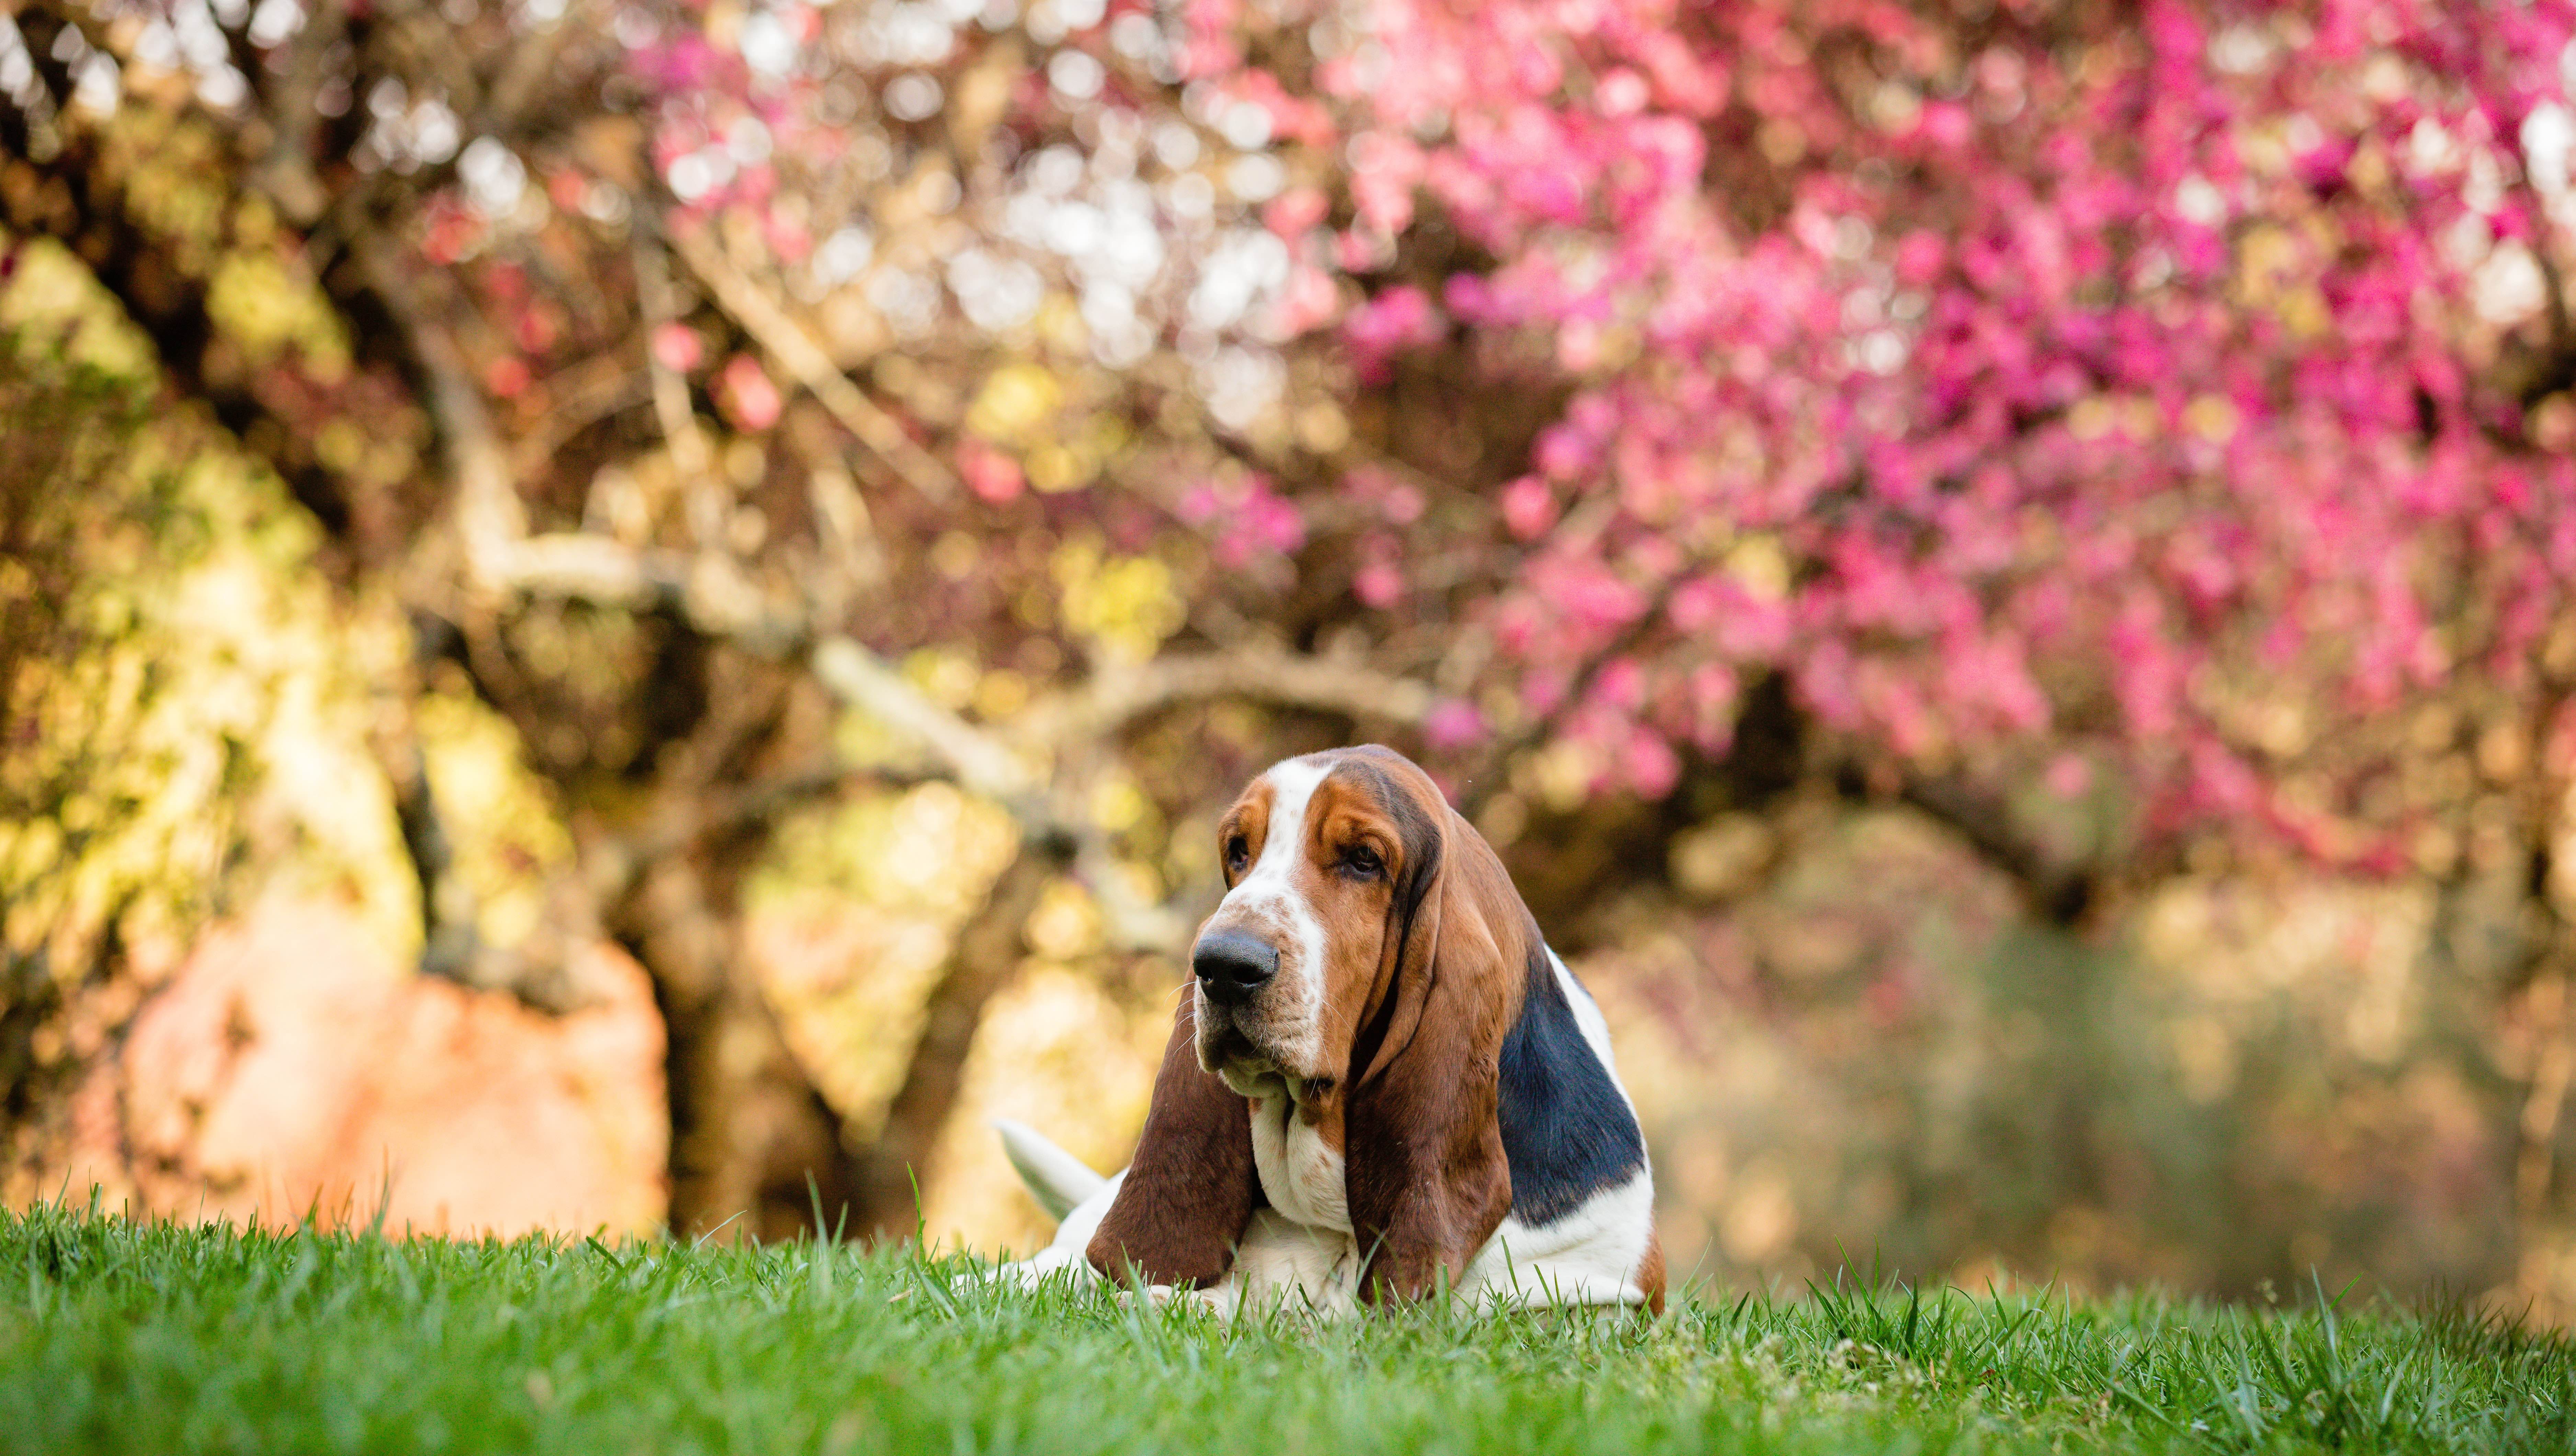 A Basset Hound in the springtime